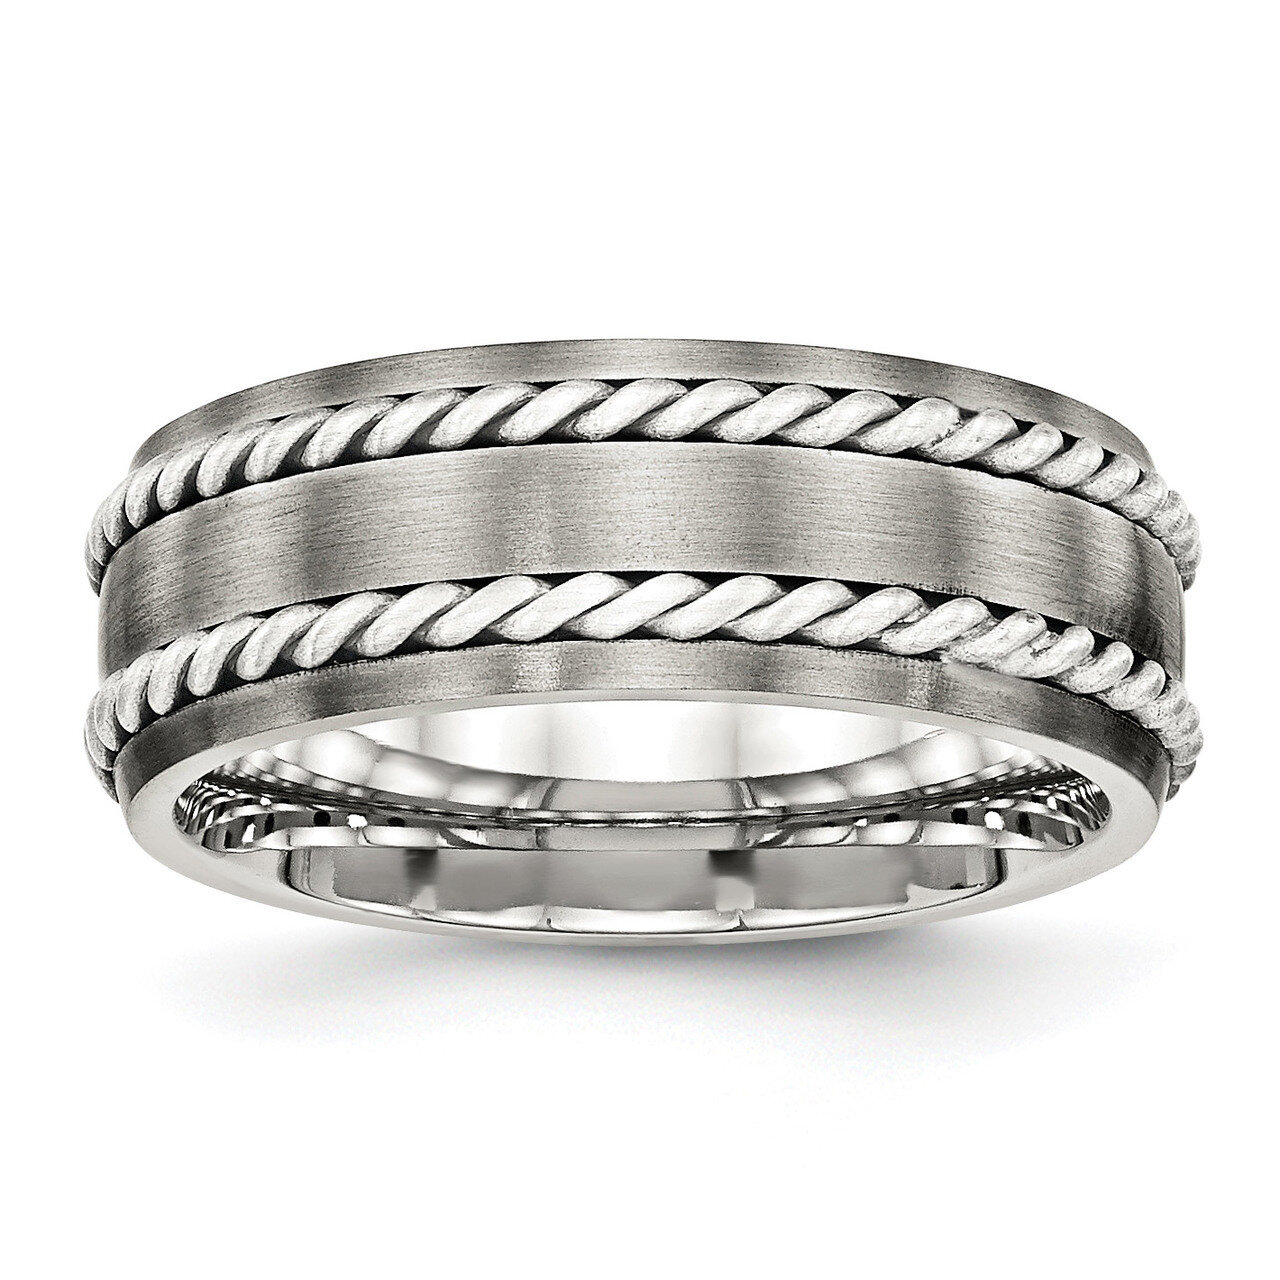 Silver Double Twist Inlay Ring Stainless Steel Brushed SR466